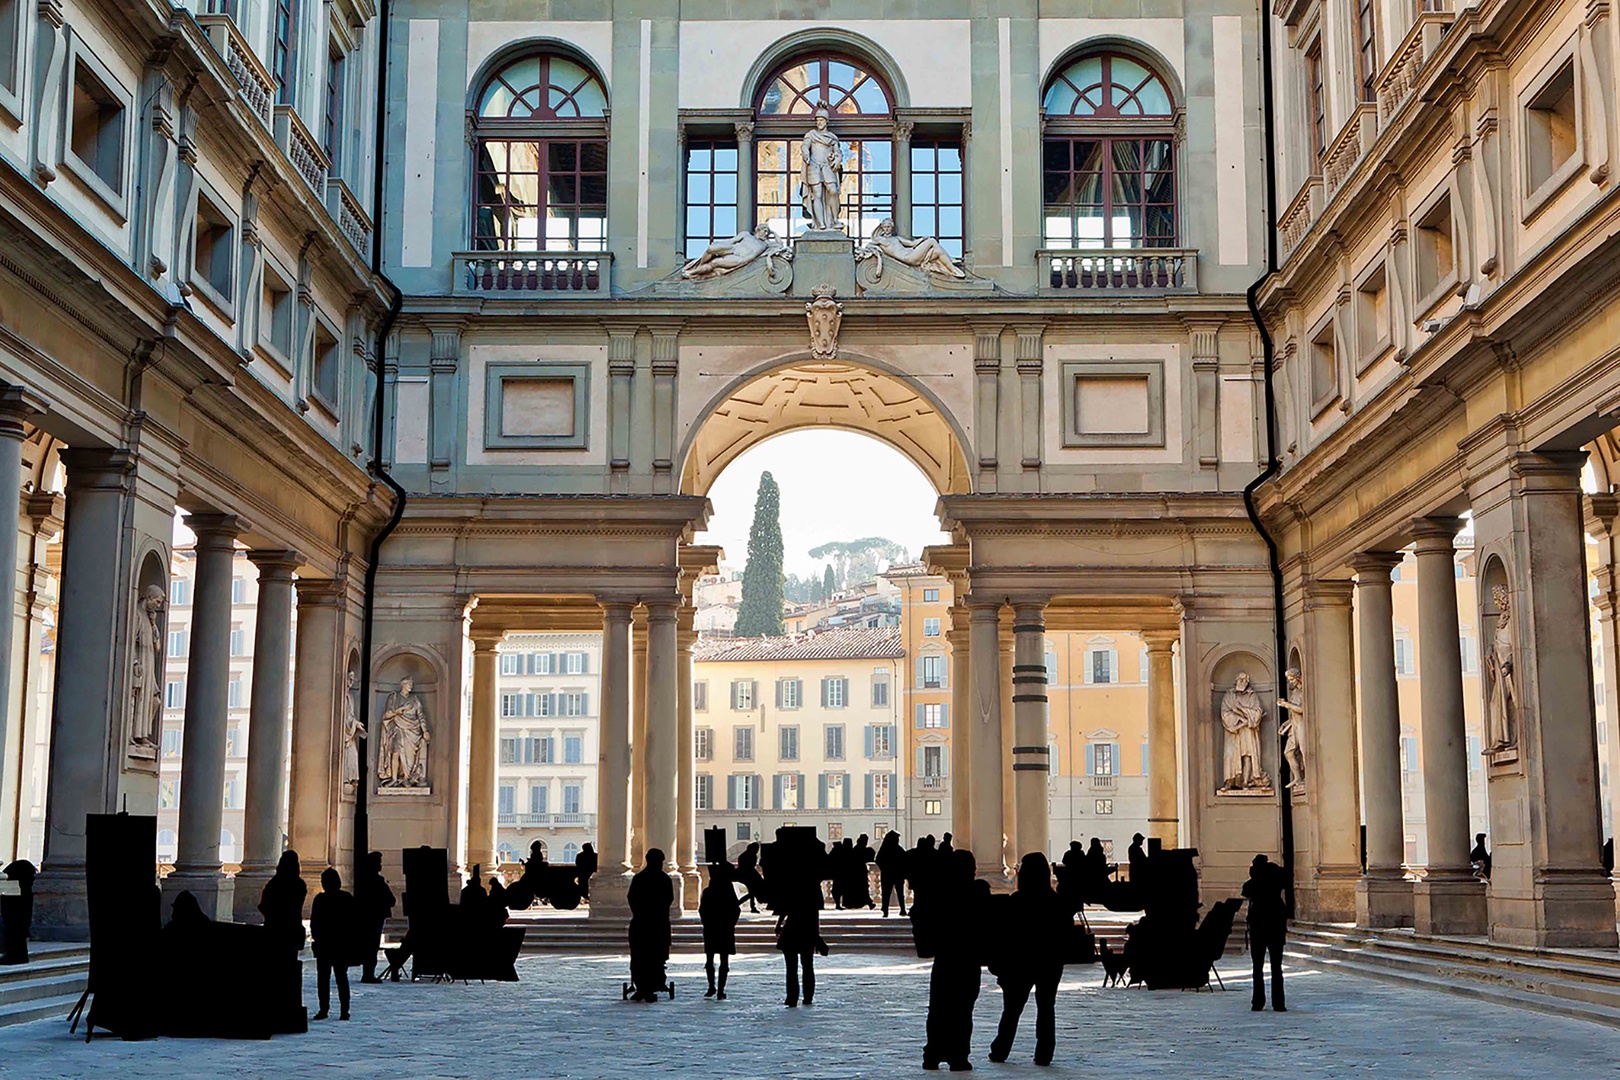 The Uffizi Gallery holds one of the finest and oldest collections of art since the time of Leonardo da Vinci.